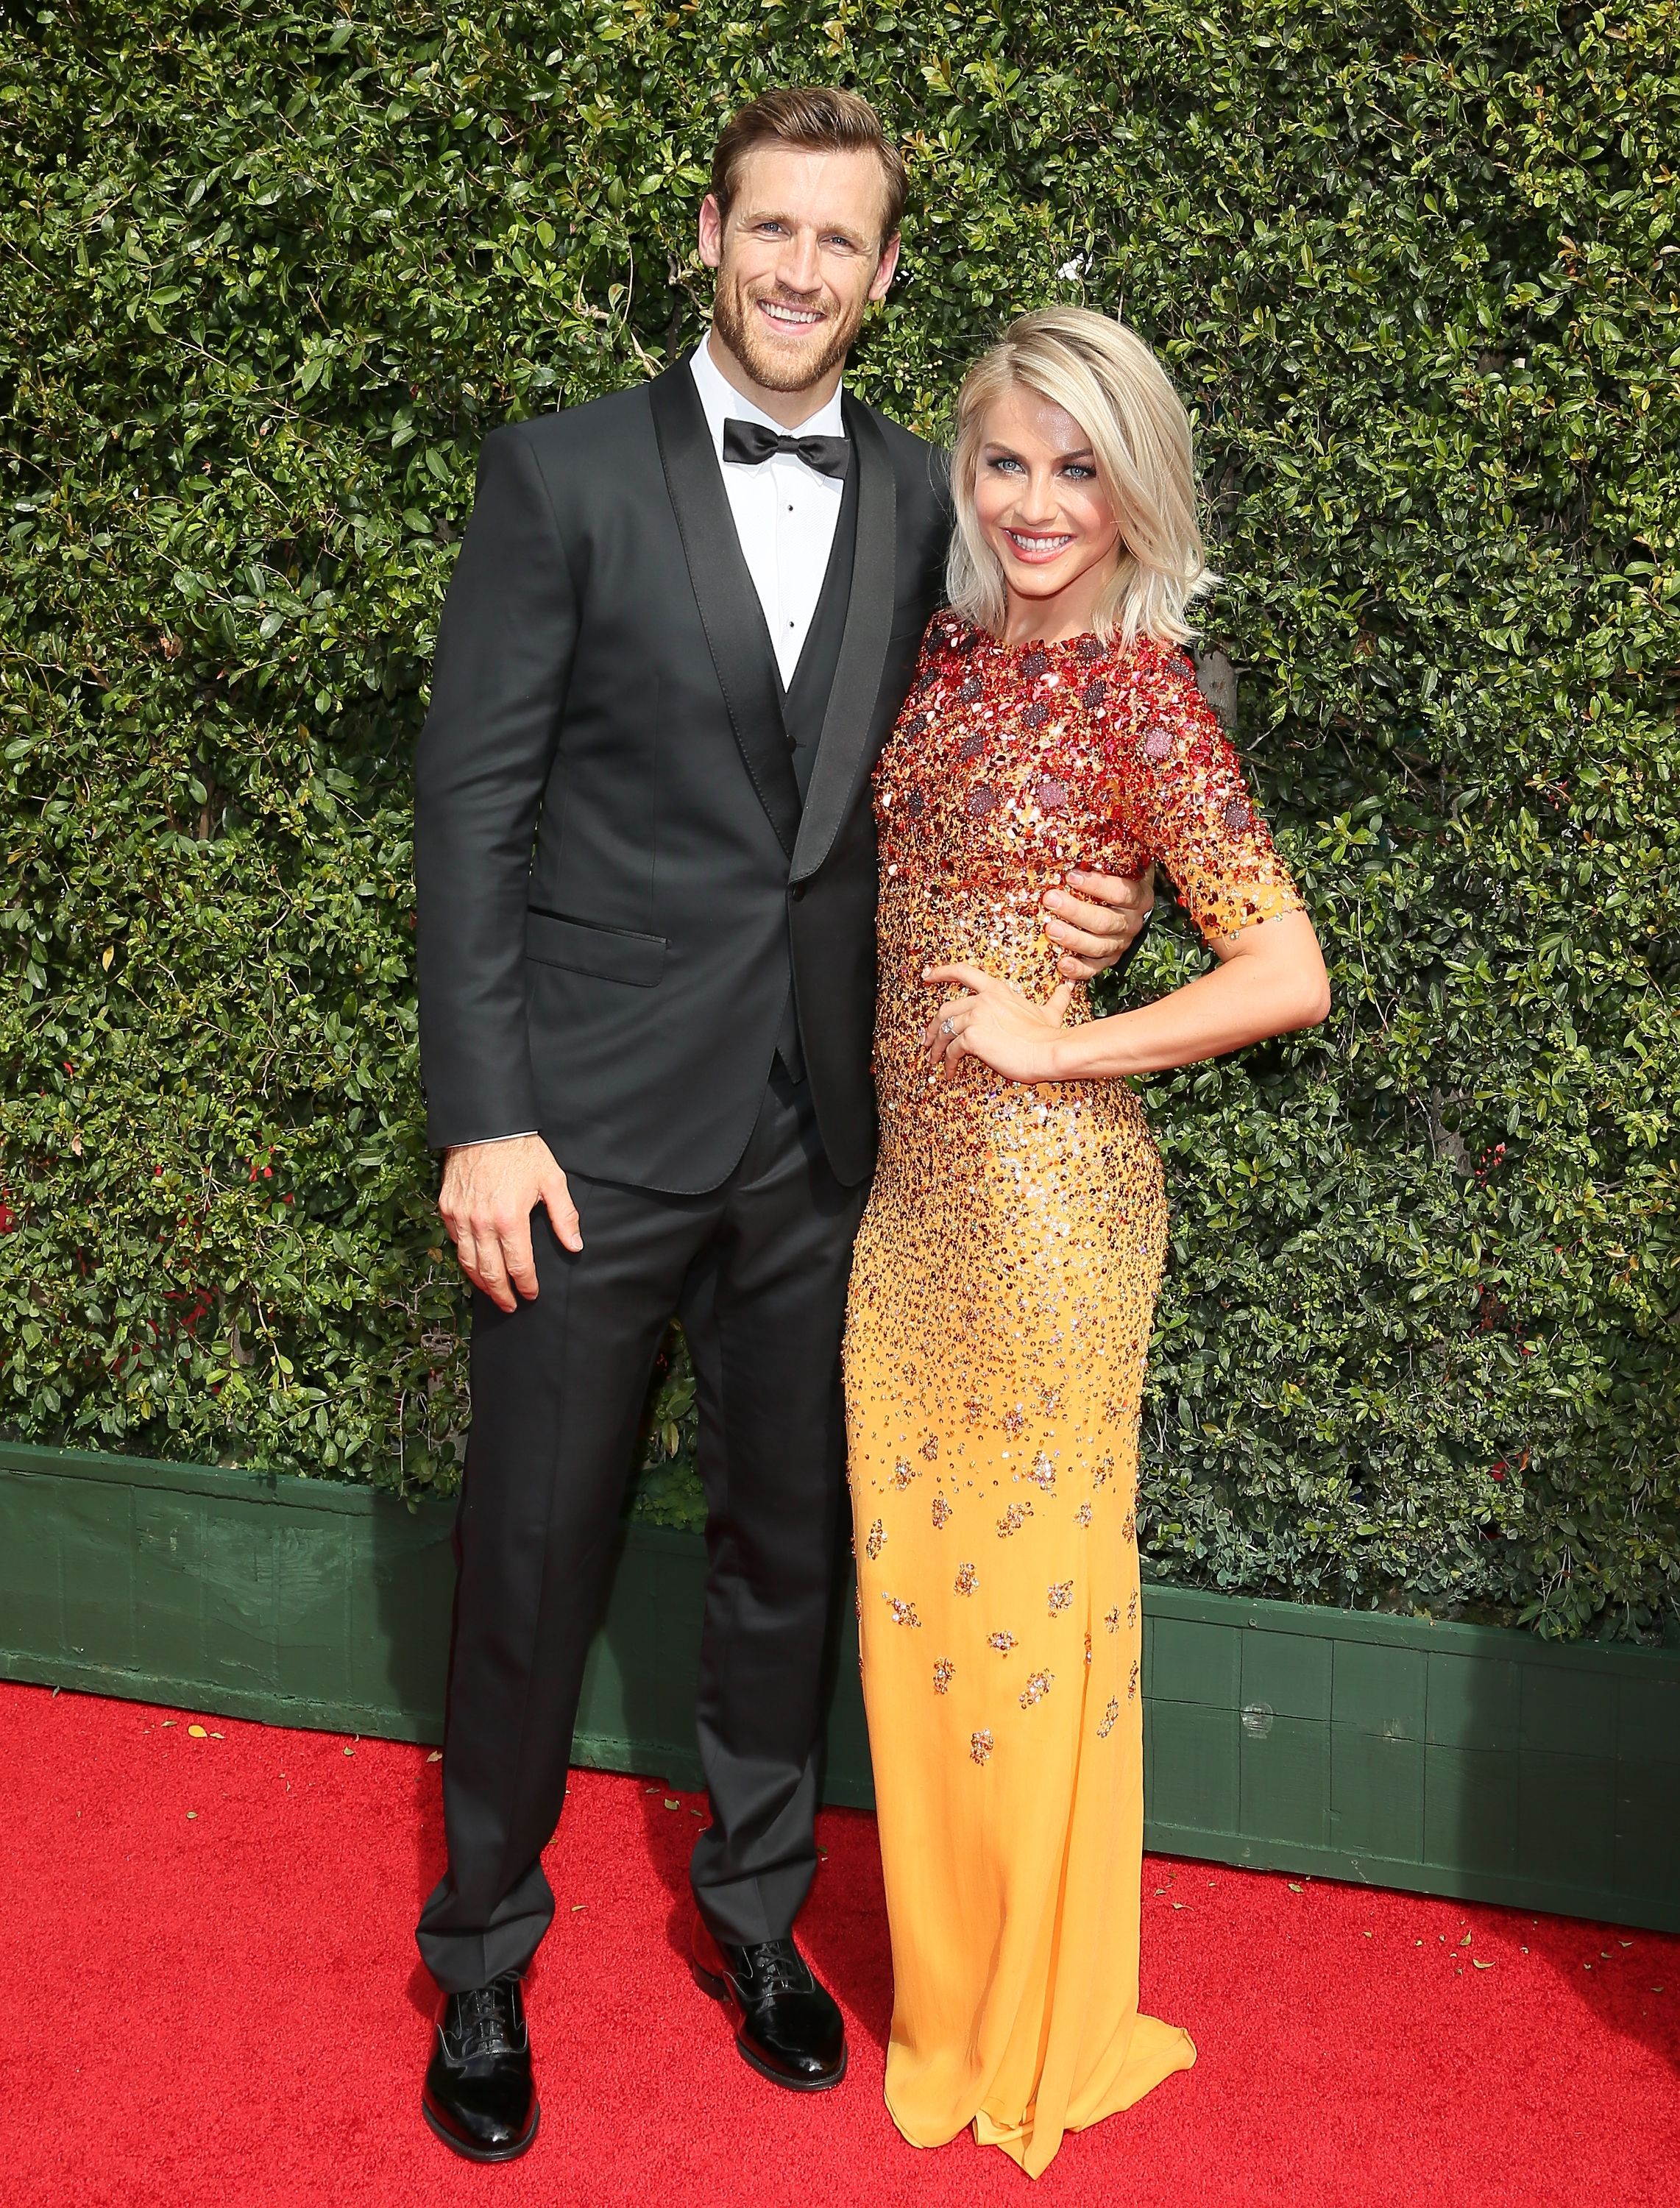 Julianne Hough & Brooks Laich Split After Almost 3 Years Of